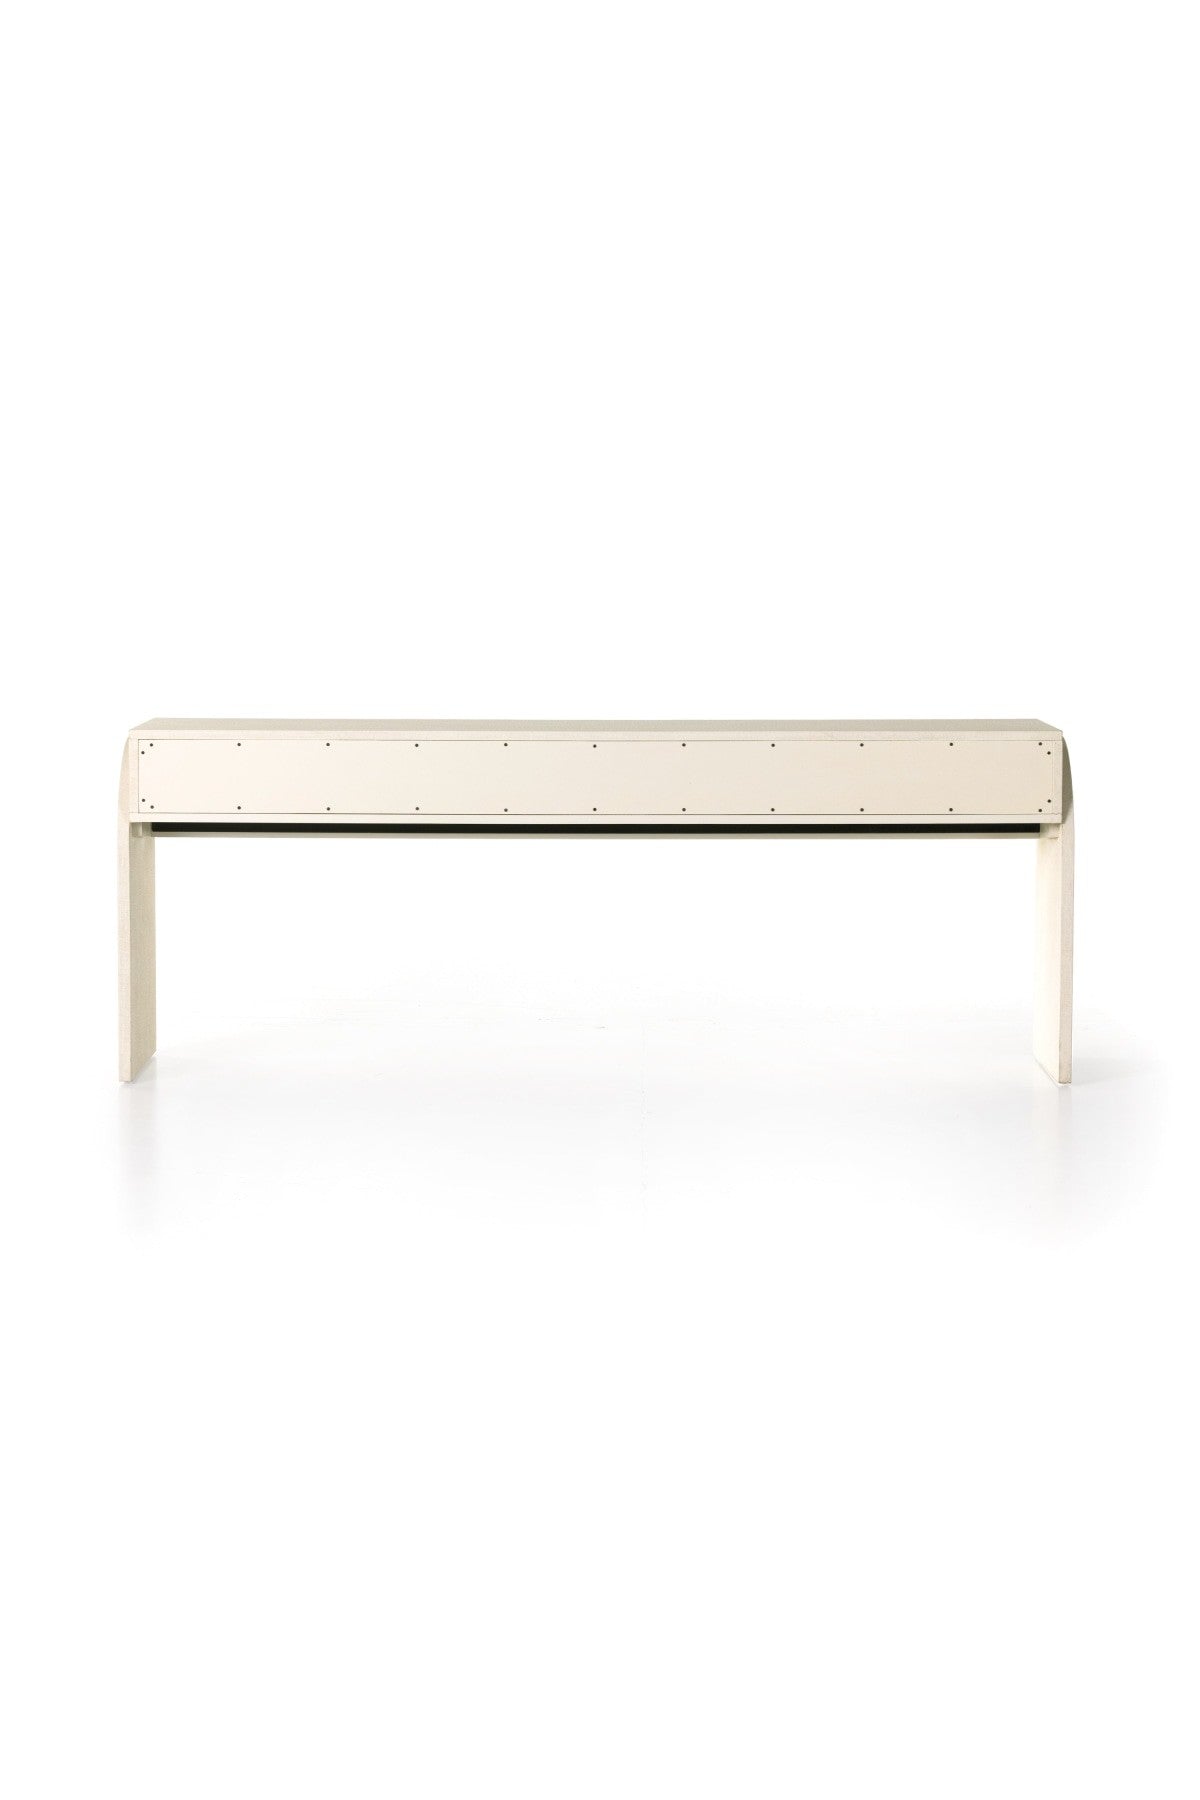 Bowman Console Table